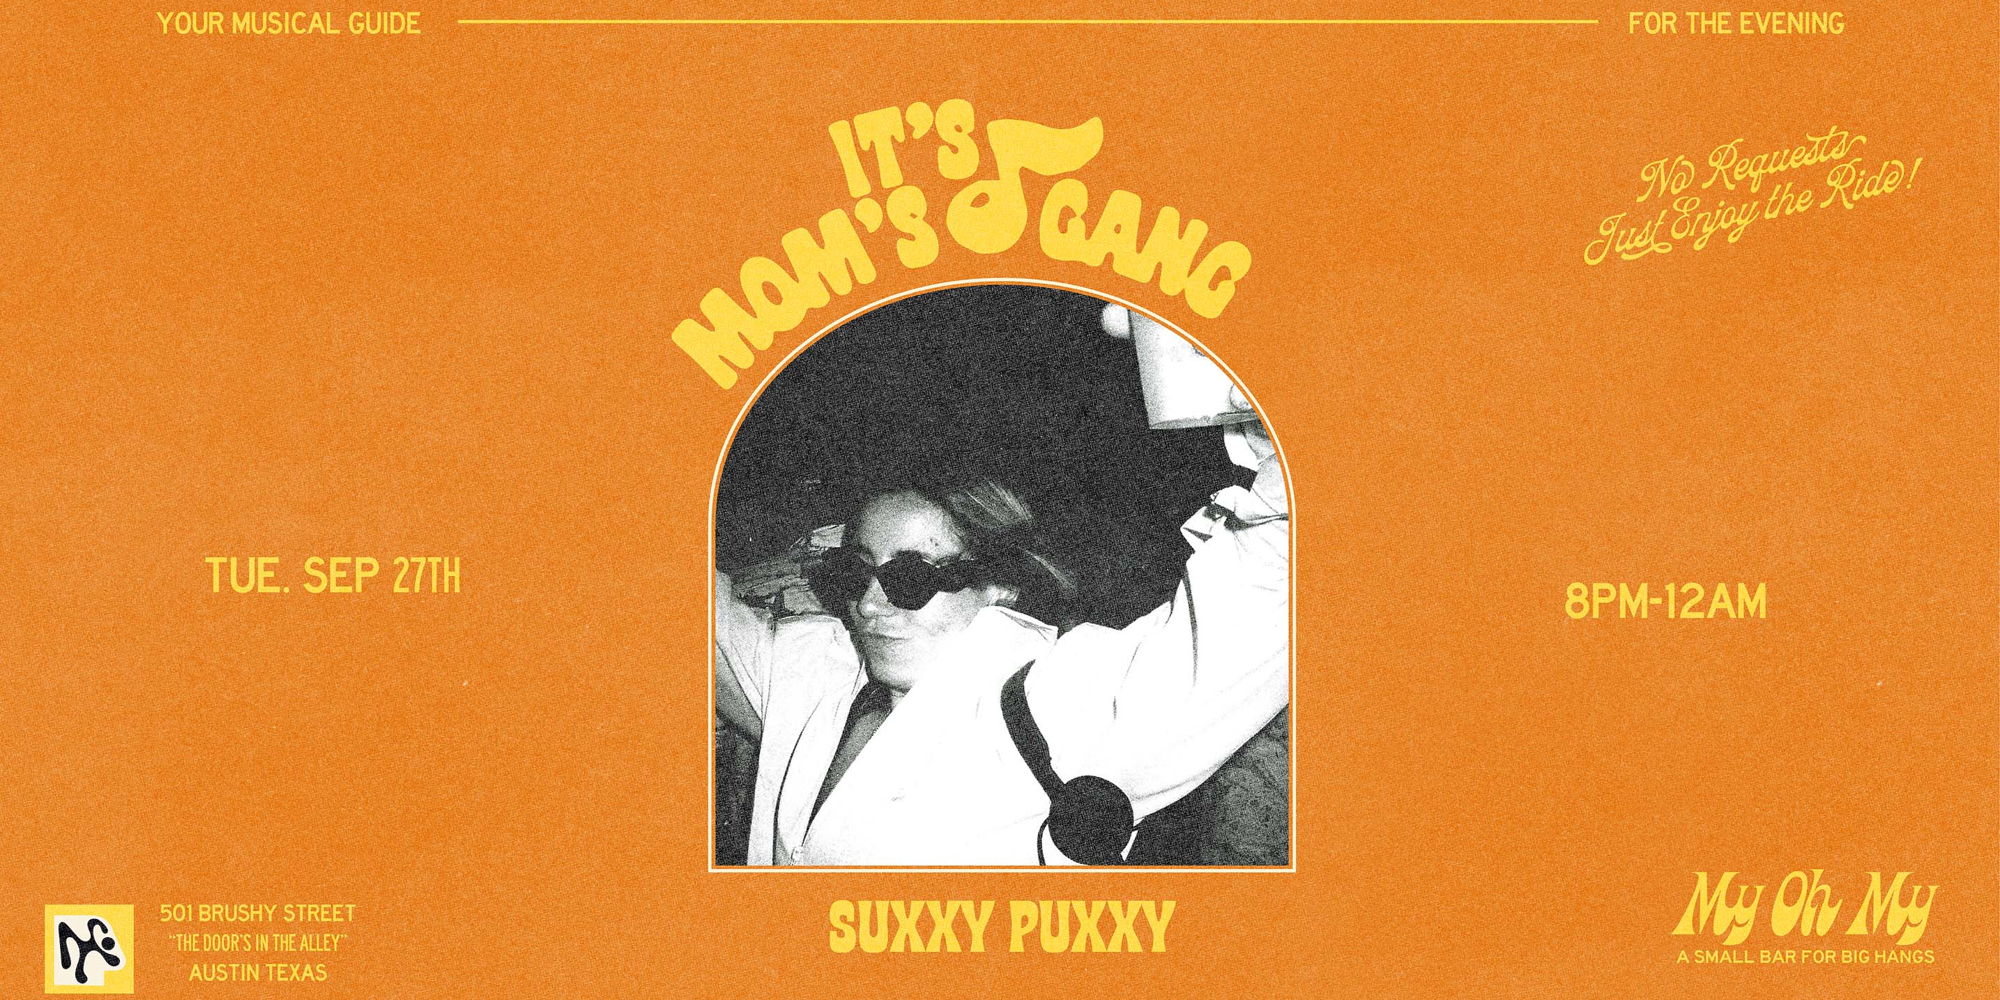 My Oh My Presents: Suxxy Puxxy on 9/27! promotional image